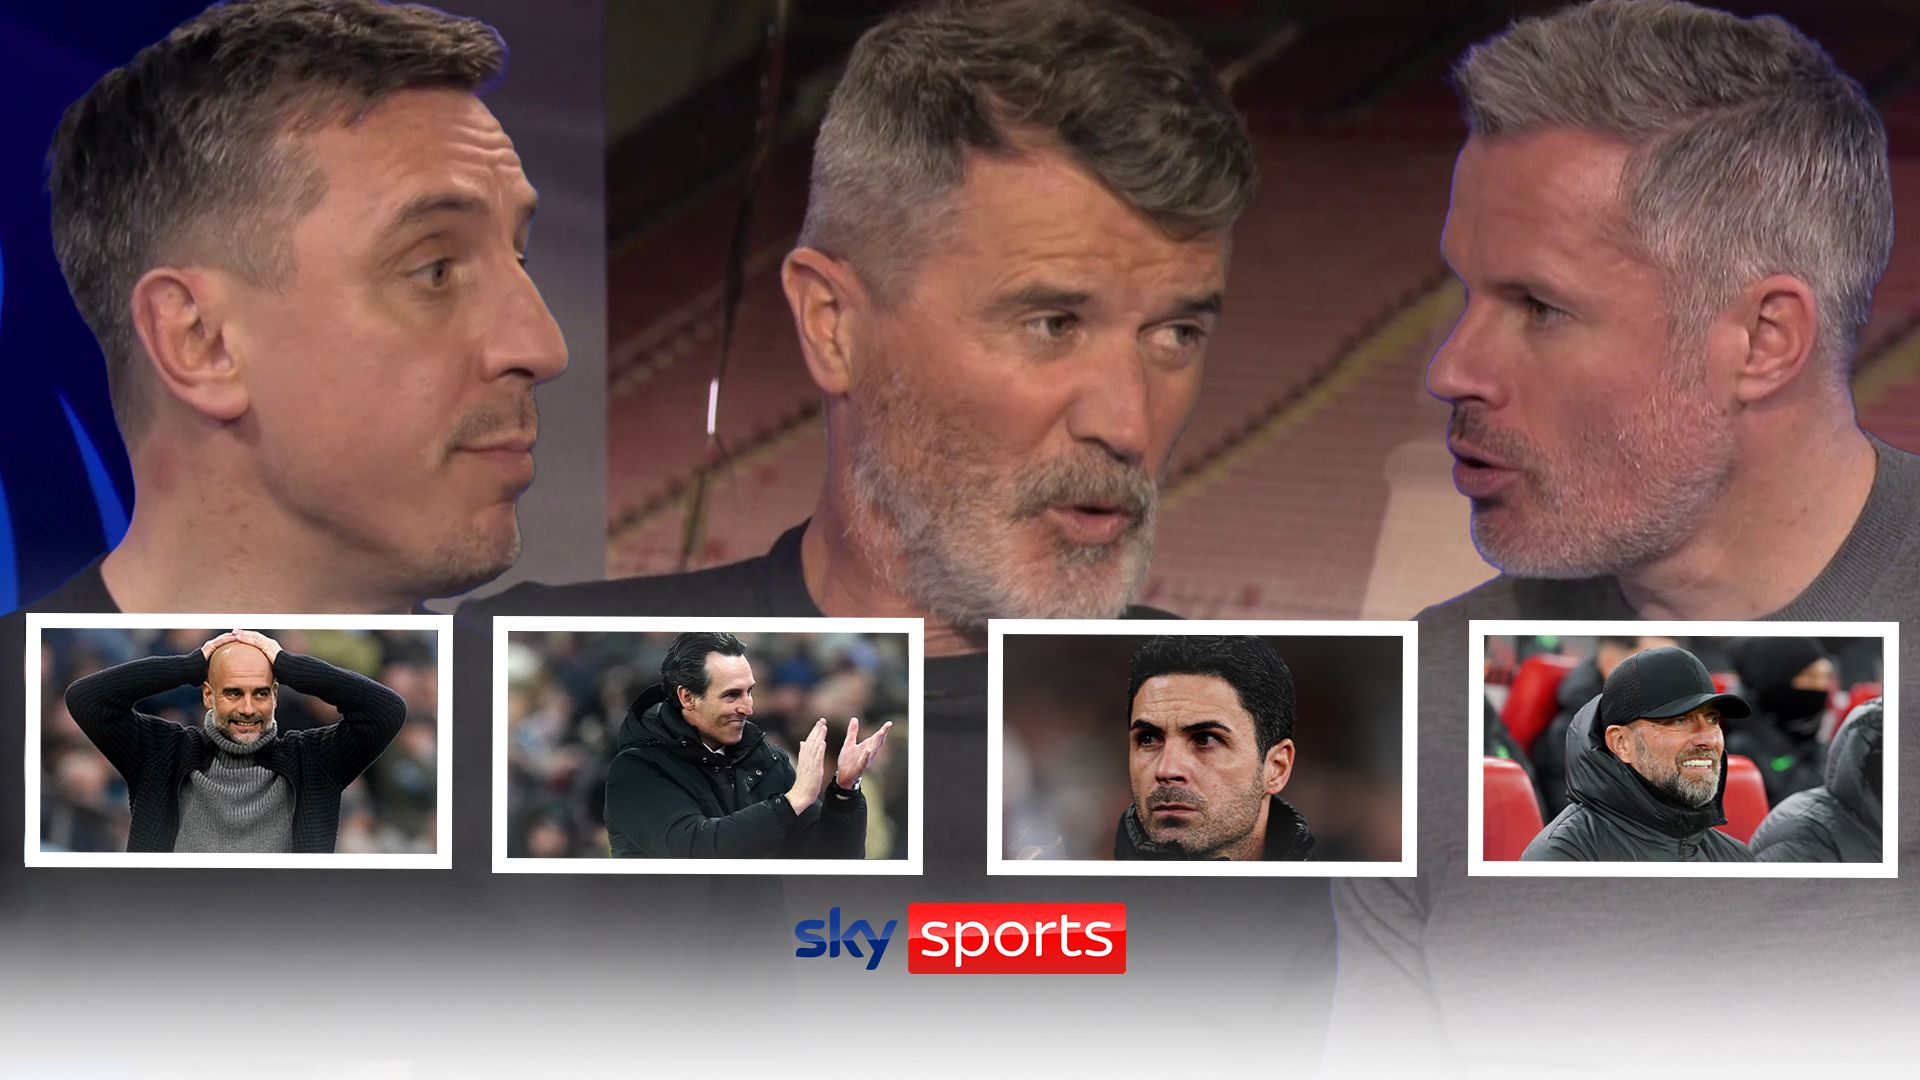 G Nev, Keane, Carra debate PL title race: 'Man City aren't as strong this year!'